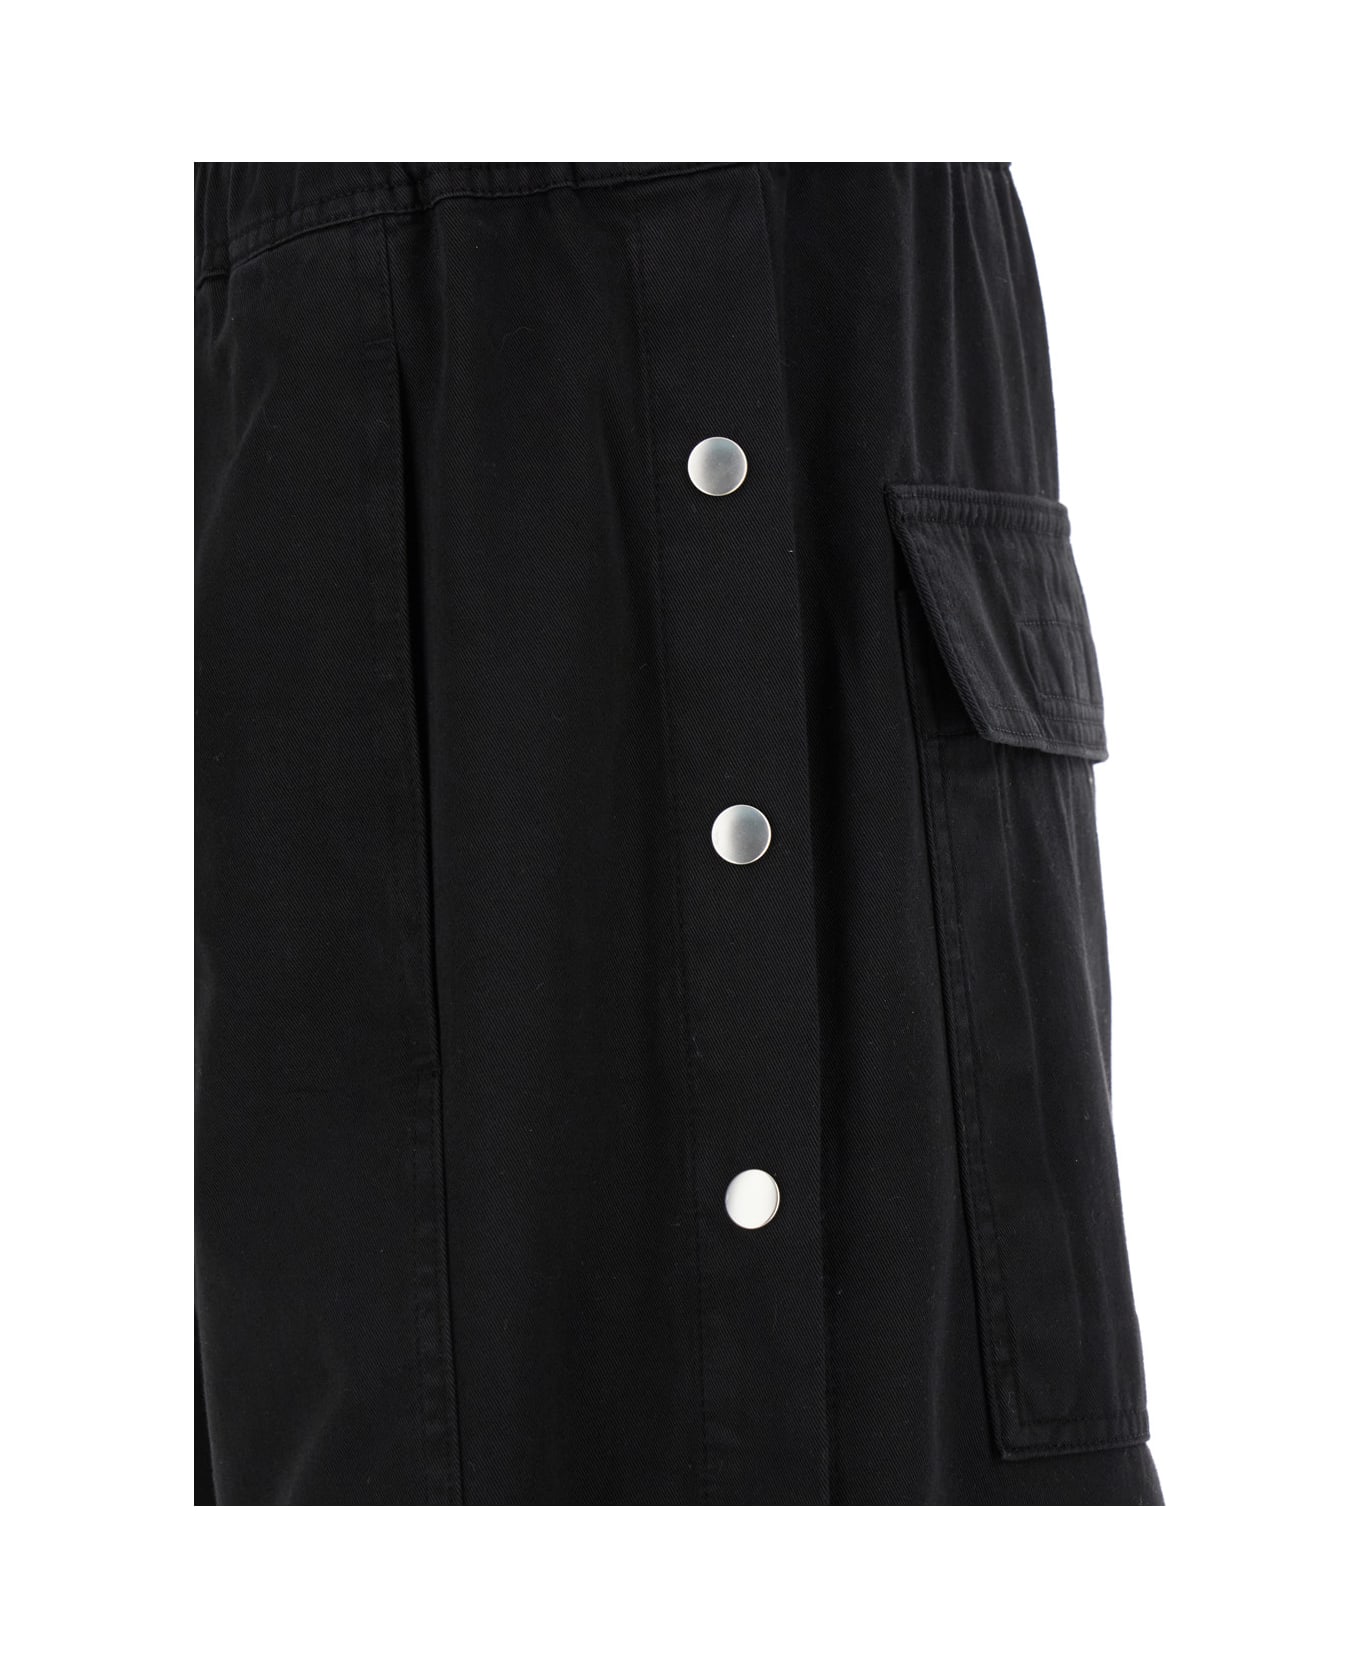 DRKSHDW Black Pants With Snap Buttons And Drawstring In Cotton Man - Black